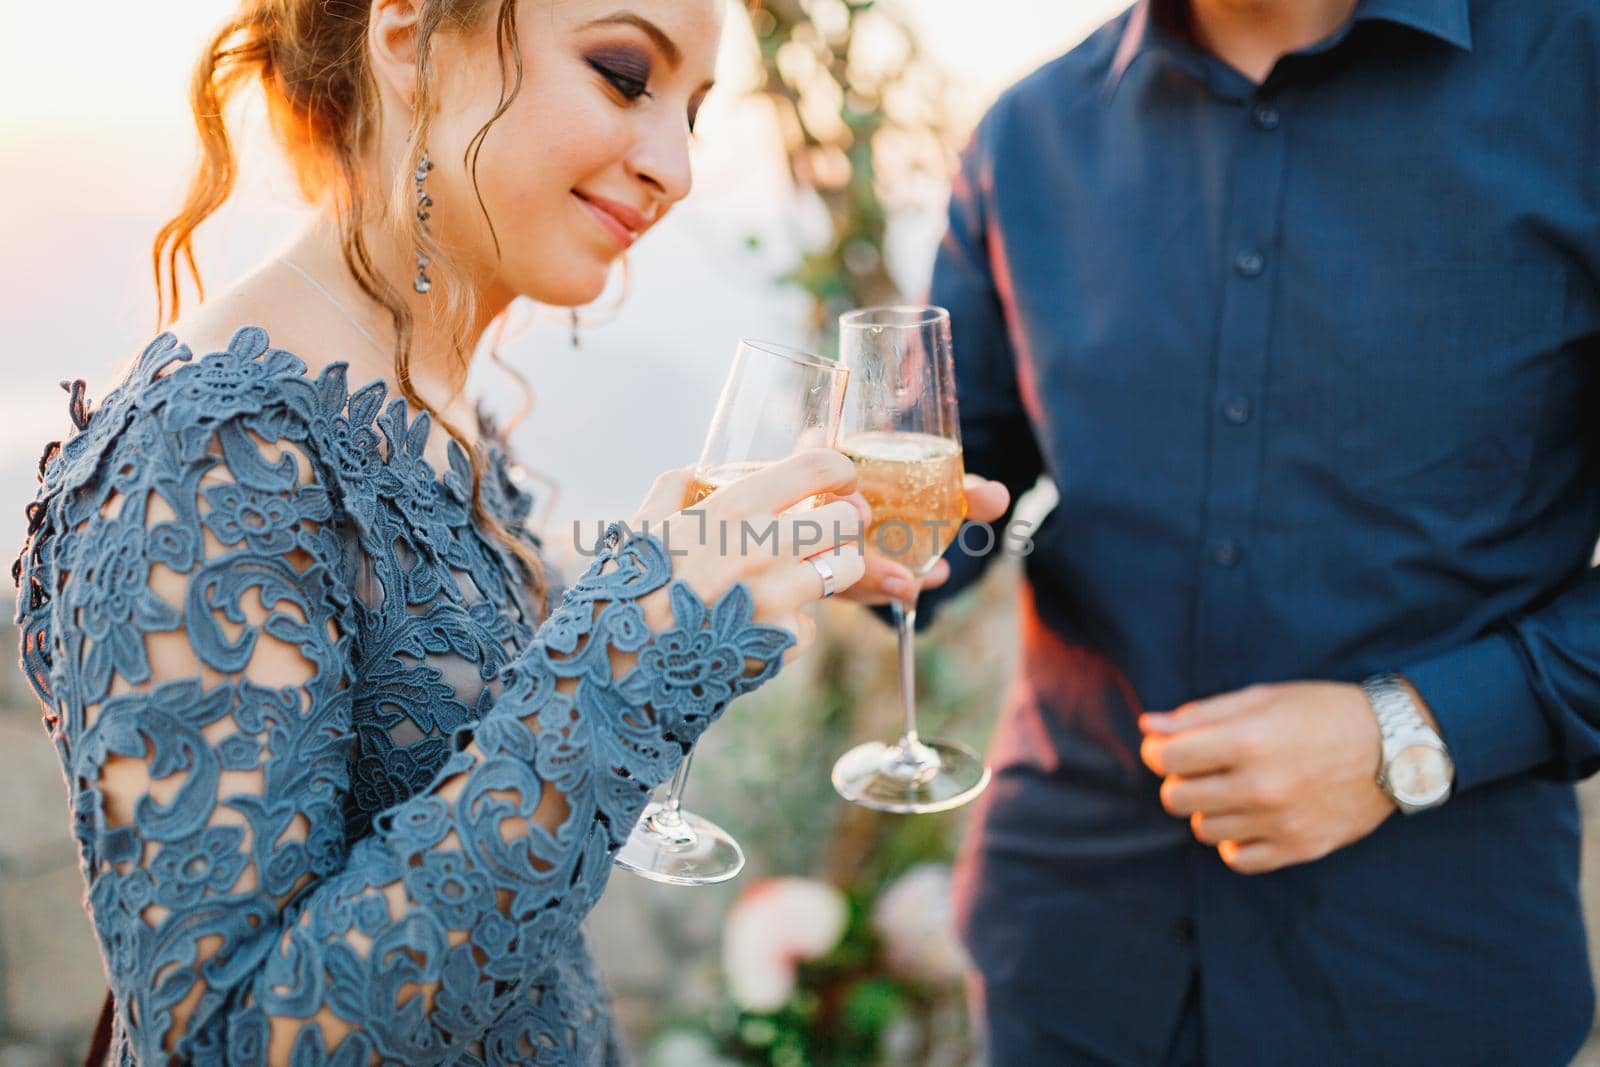 Bride and groom drink champagne from glasses near the wedding arch during the wedding ceremony by Nadtochiy